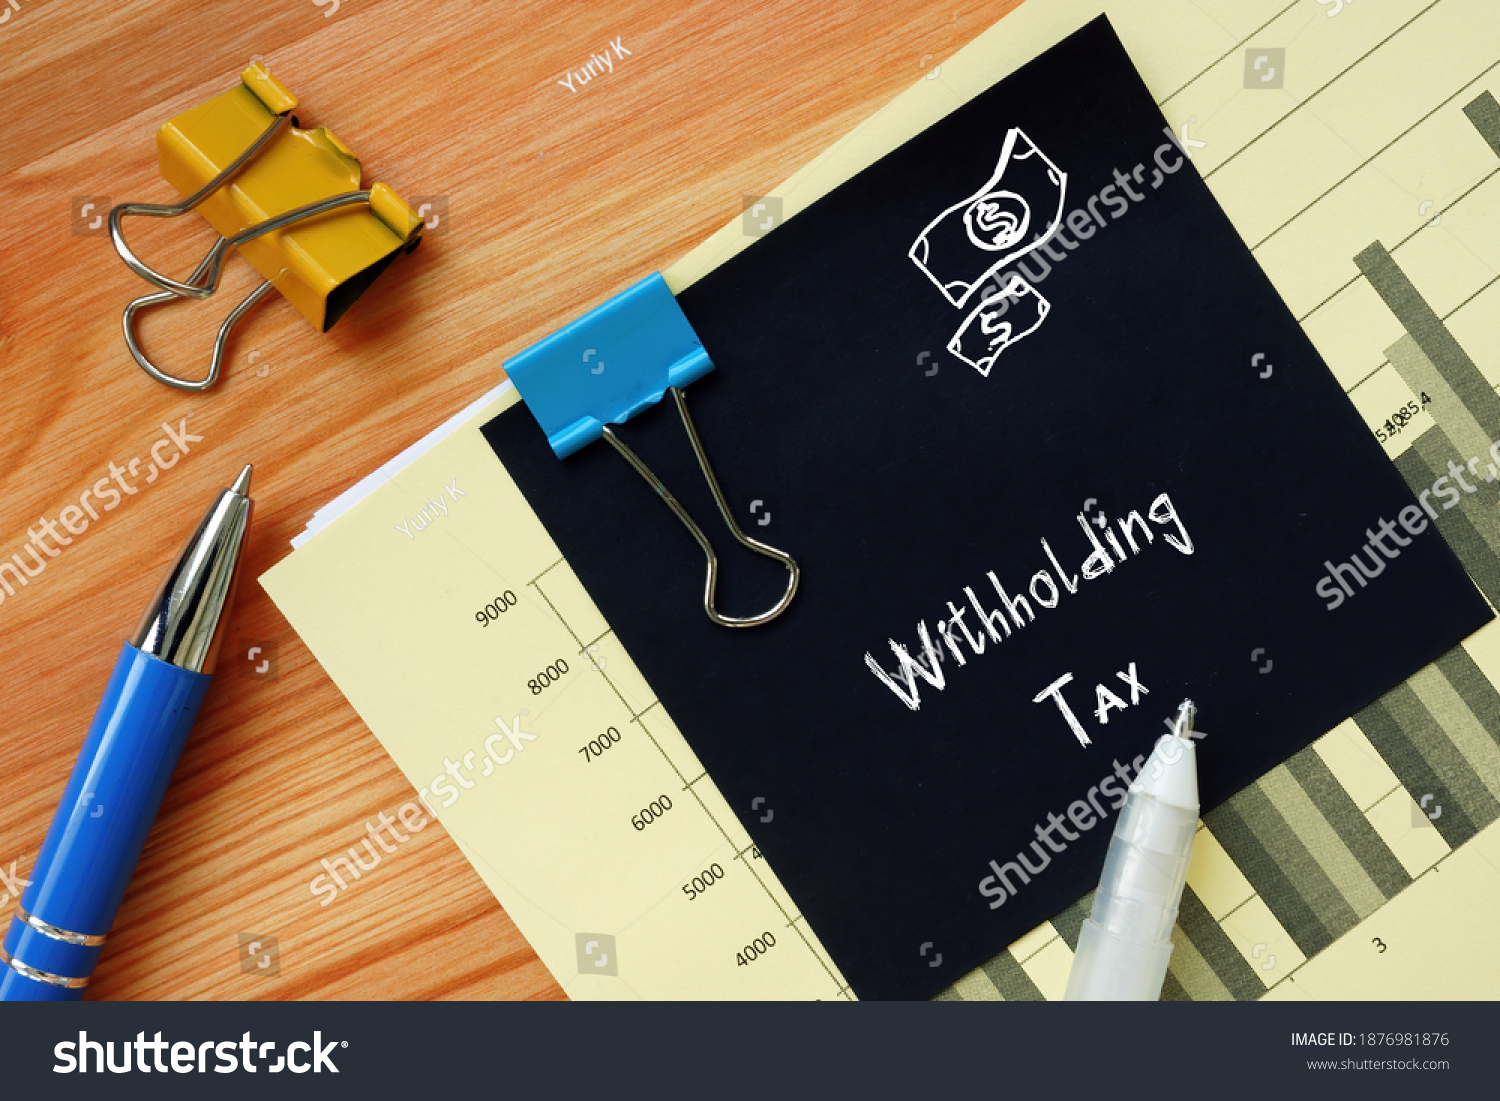 Financial concept meaning Withholding Tax with phrase on the sheet. #1876981876